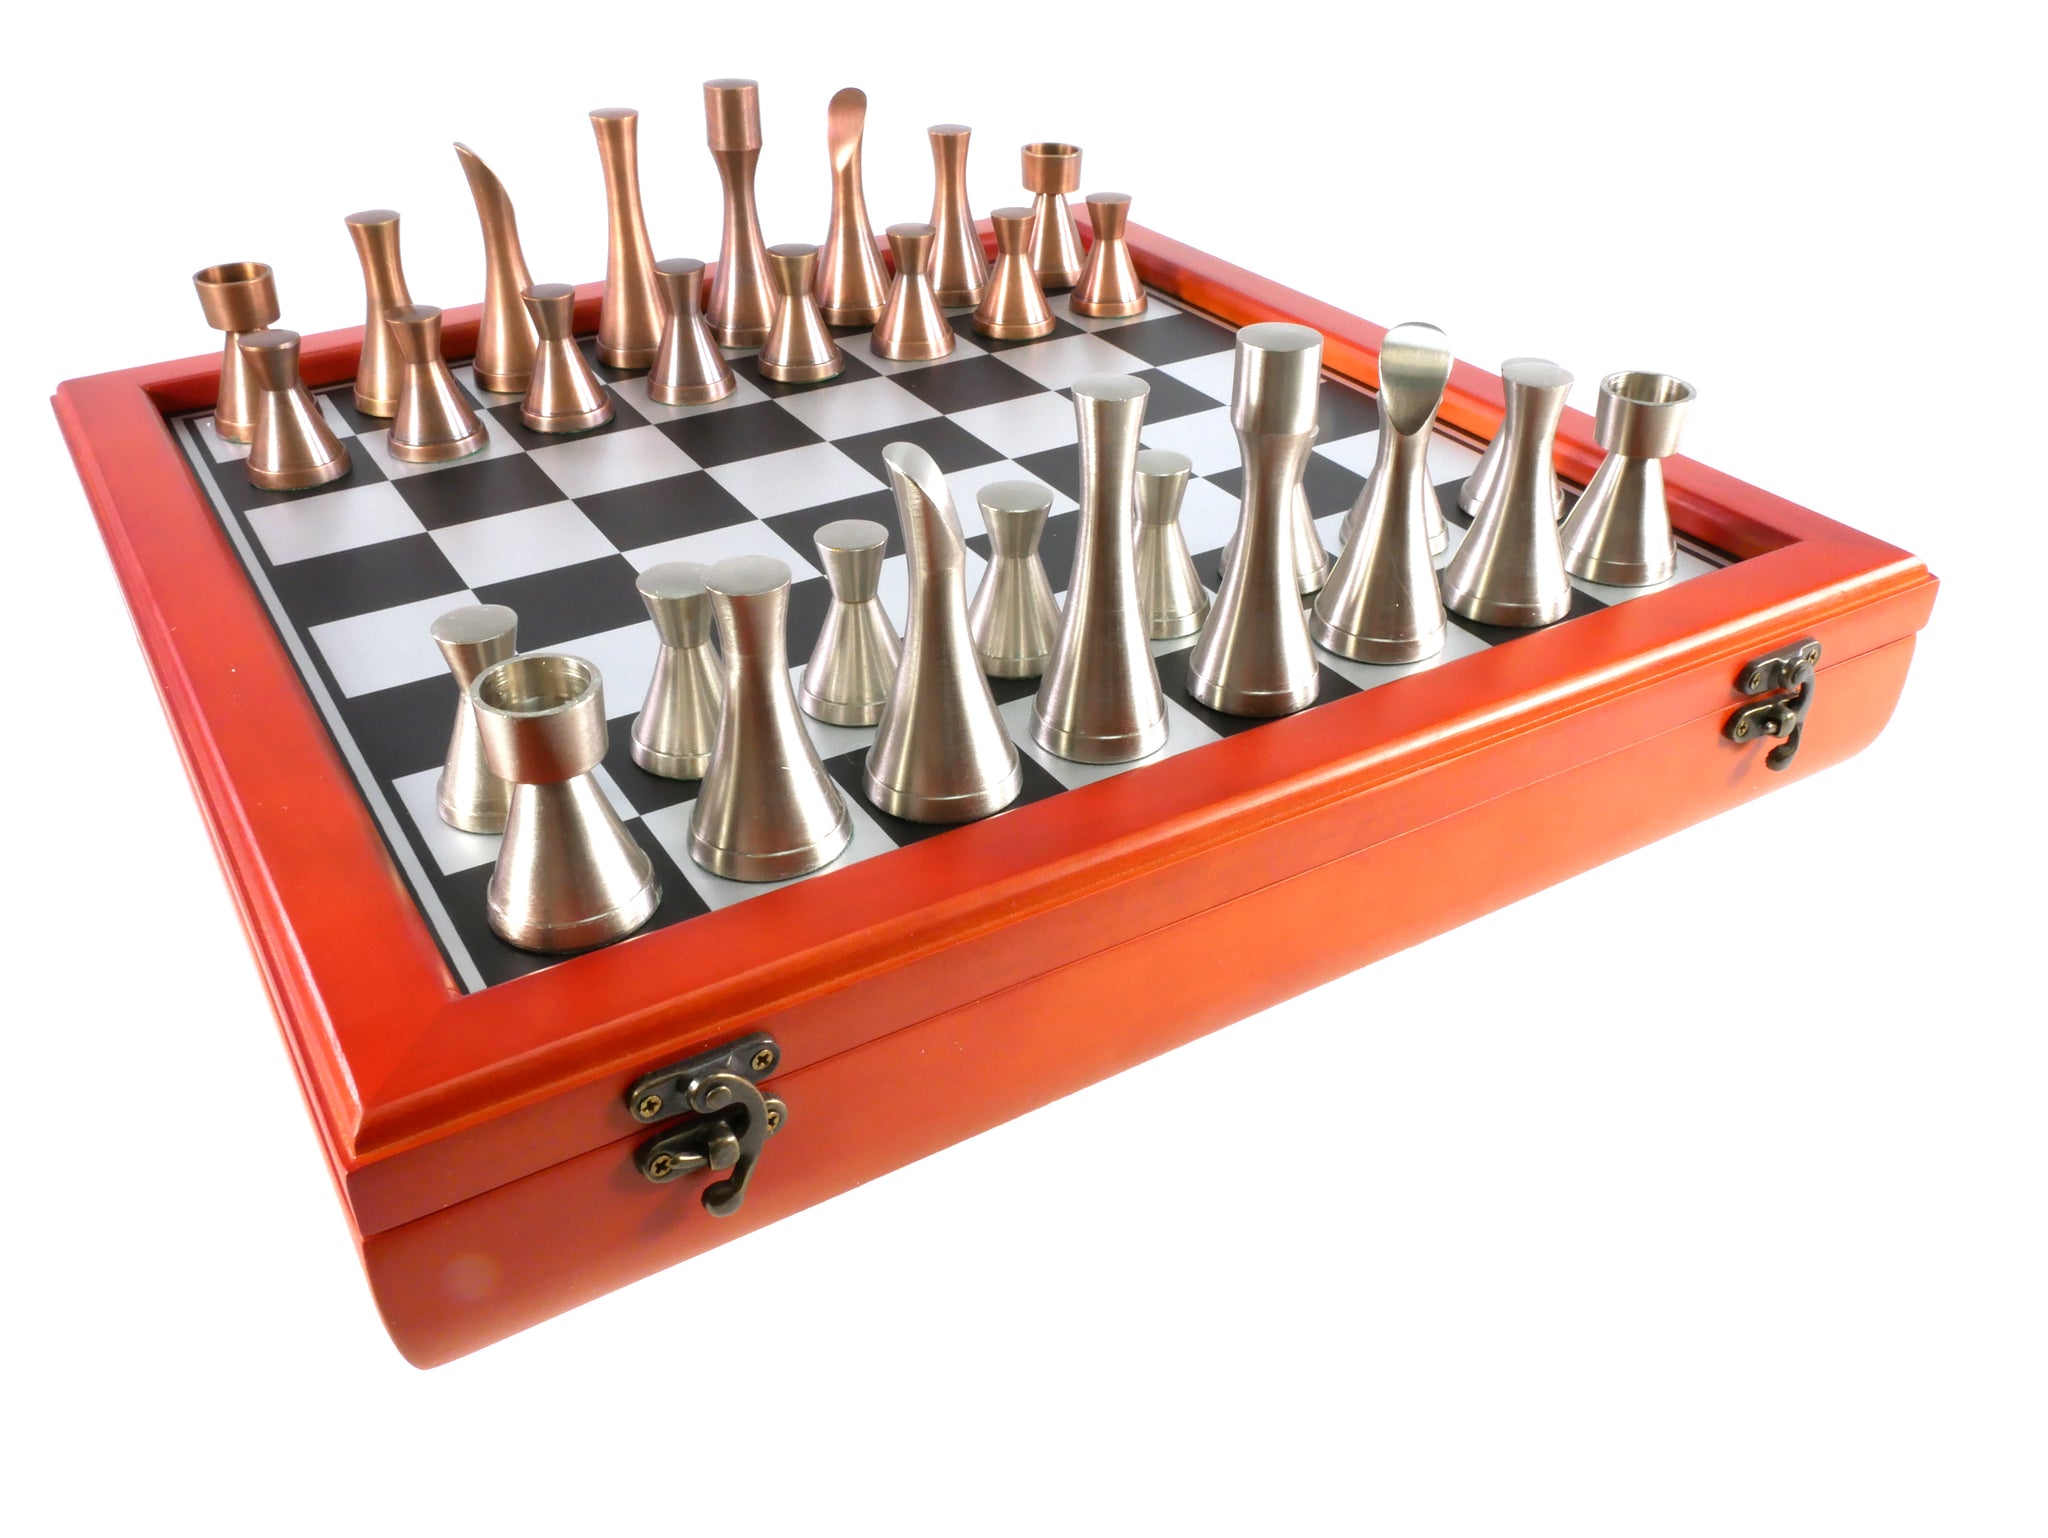 Chess Set - Contemporary Copper Chess Pieces on Cherry Stained Chest